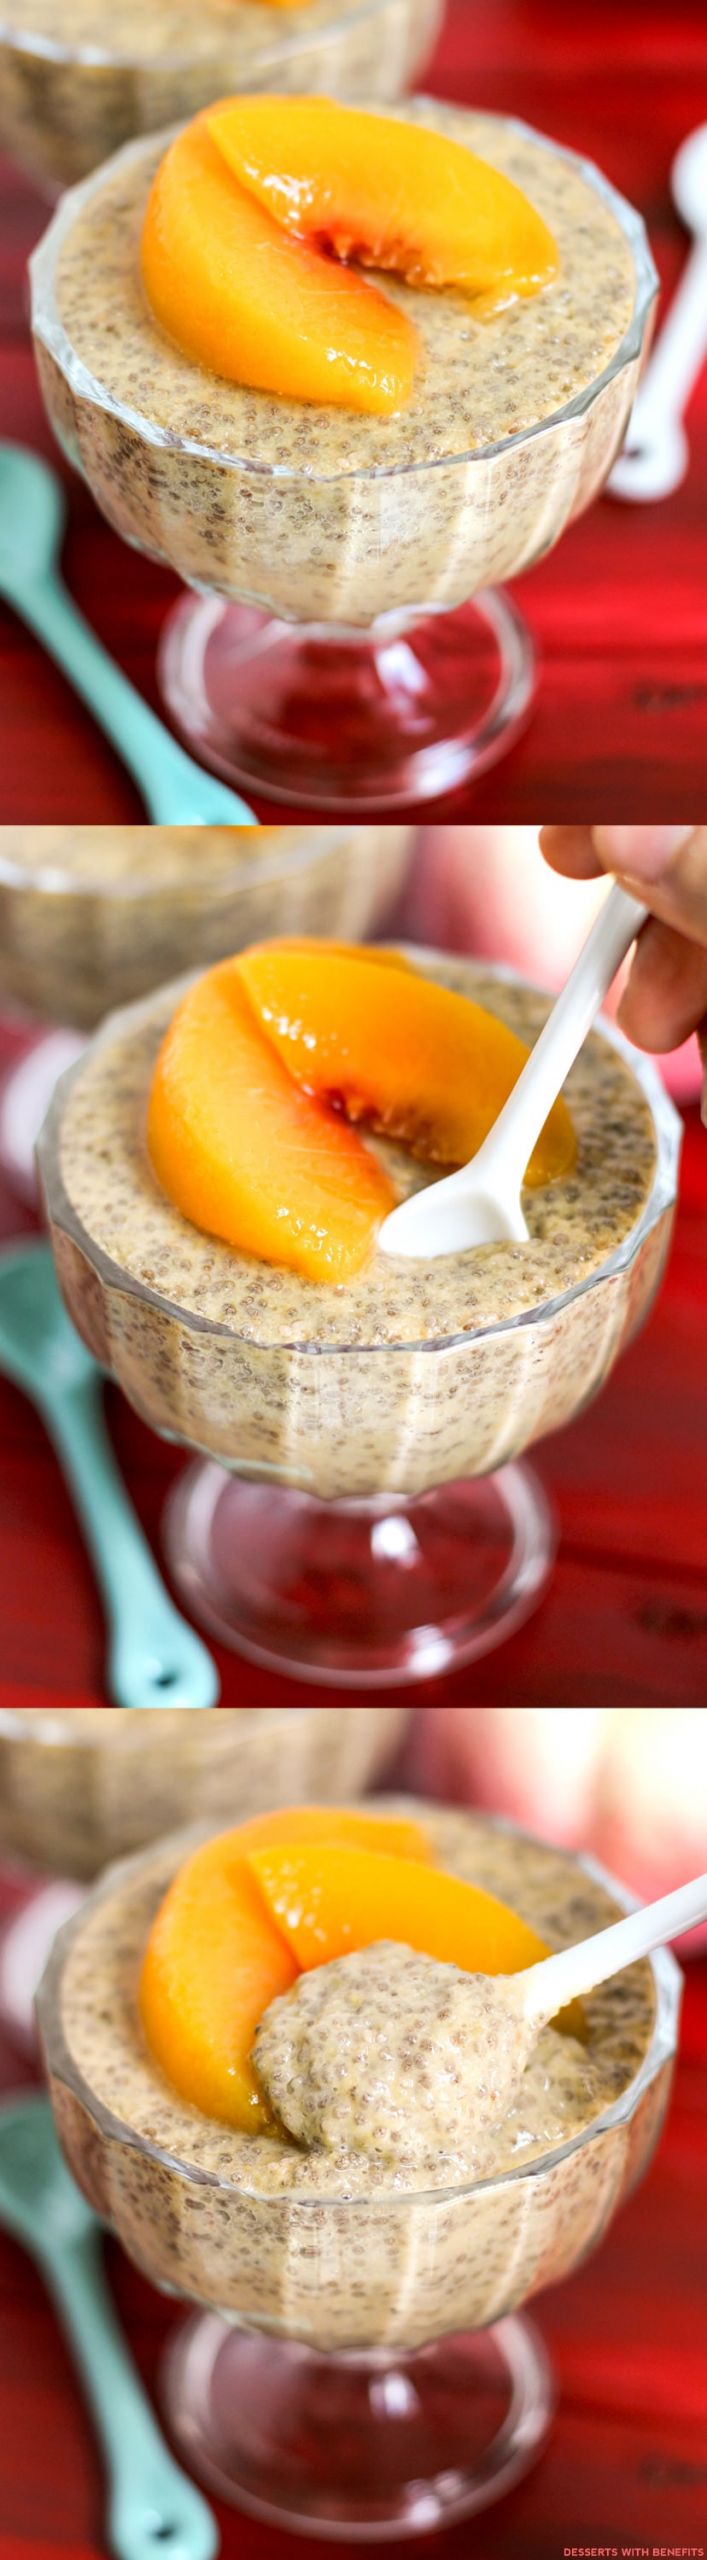 Low Calorie Peach Recipes
 Healthy Ginger Peach Chia Seed Pudding Recipe